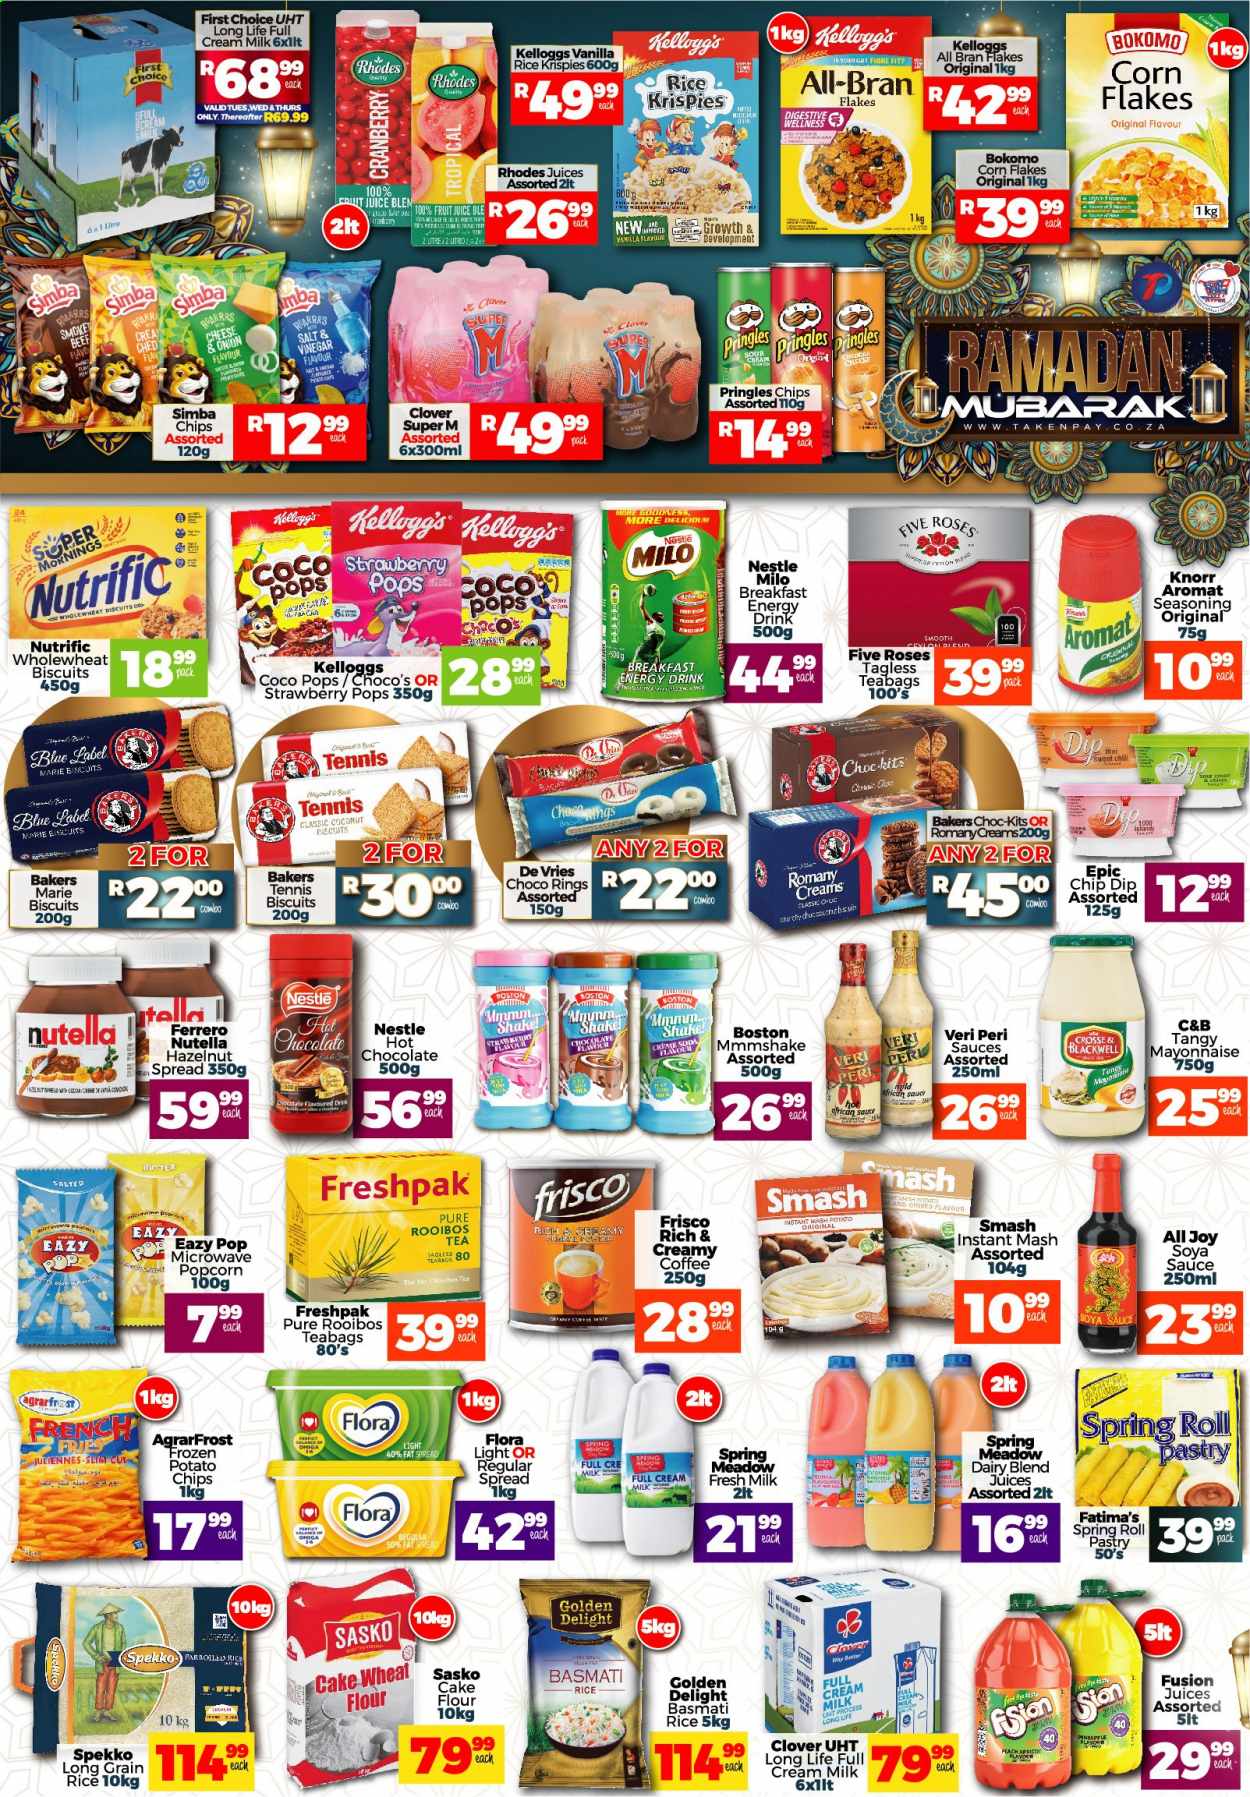 Take n Pay specials - 04.13.2021 - 04.18.2021. 